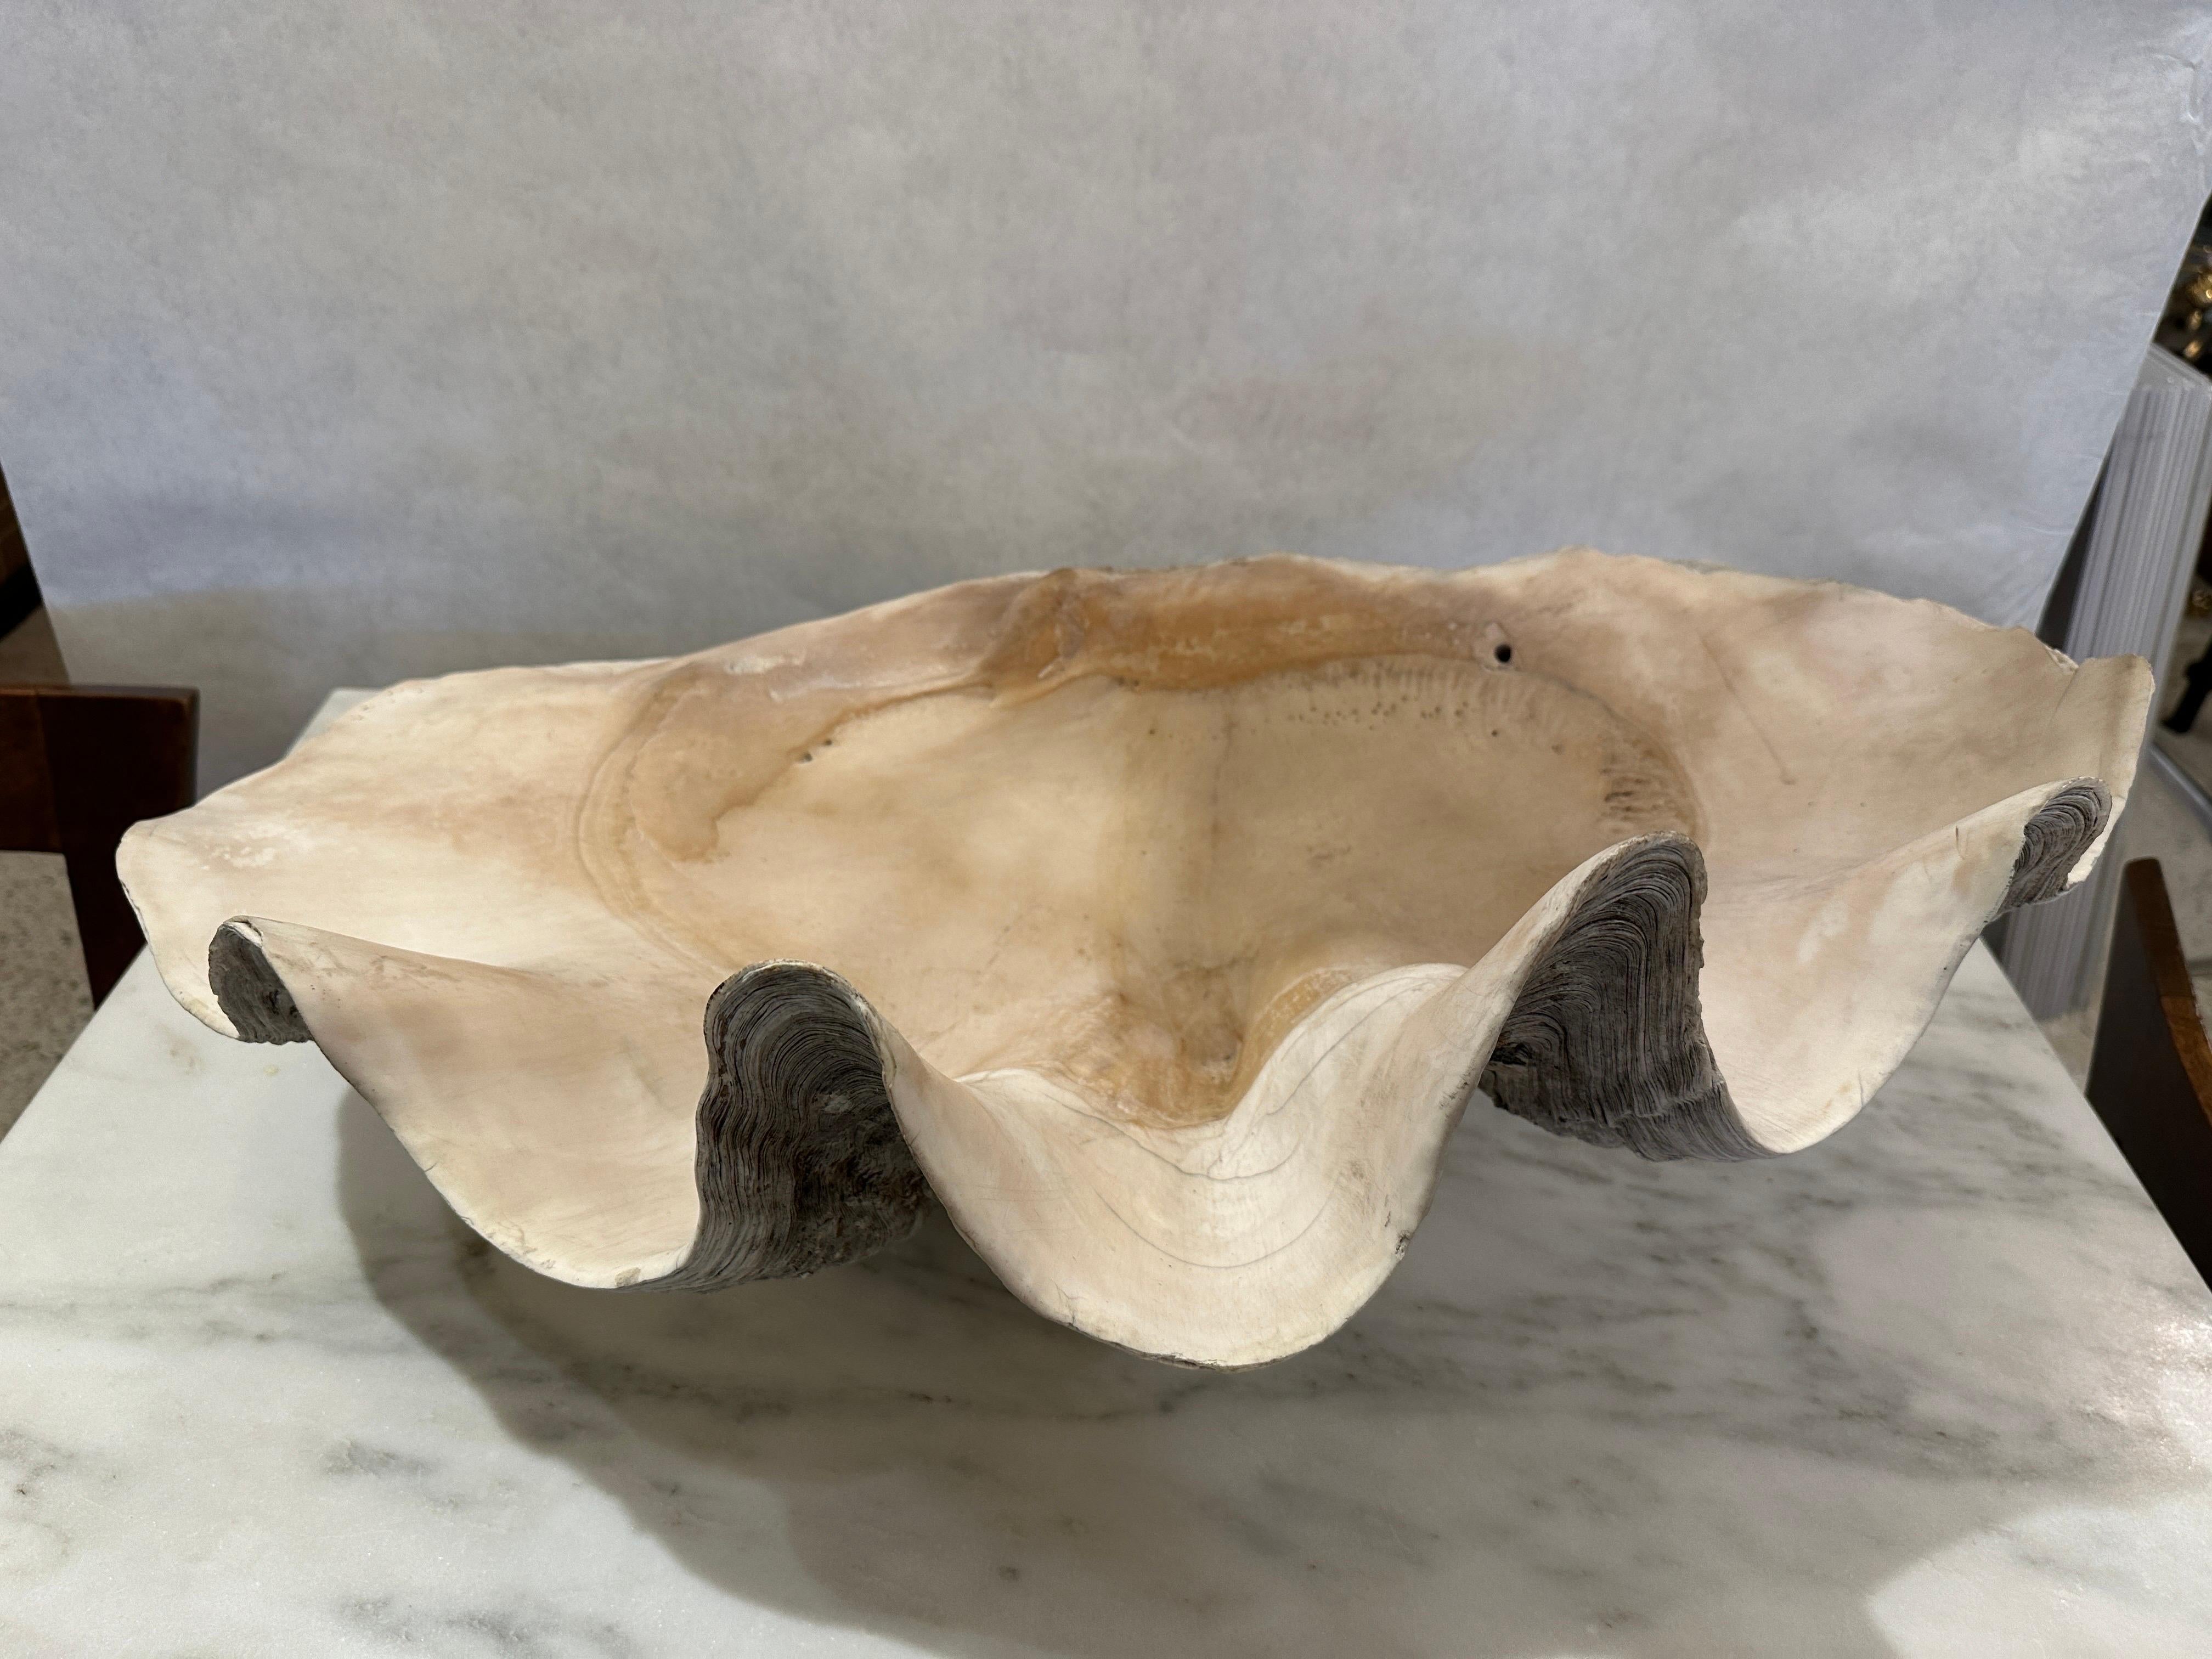 Pacific Islands South Pacific Natural Giant Clam Shell Specimen For Sale